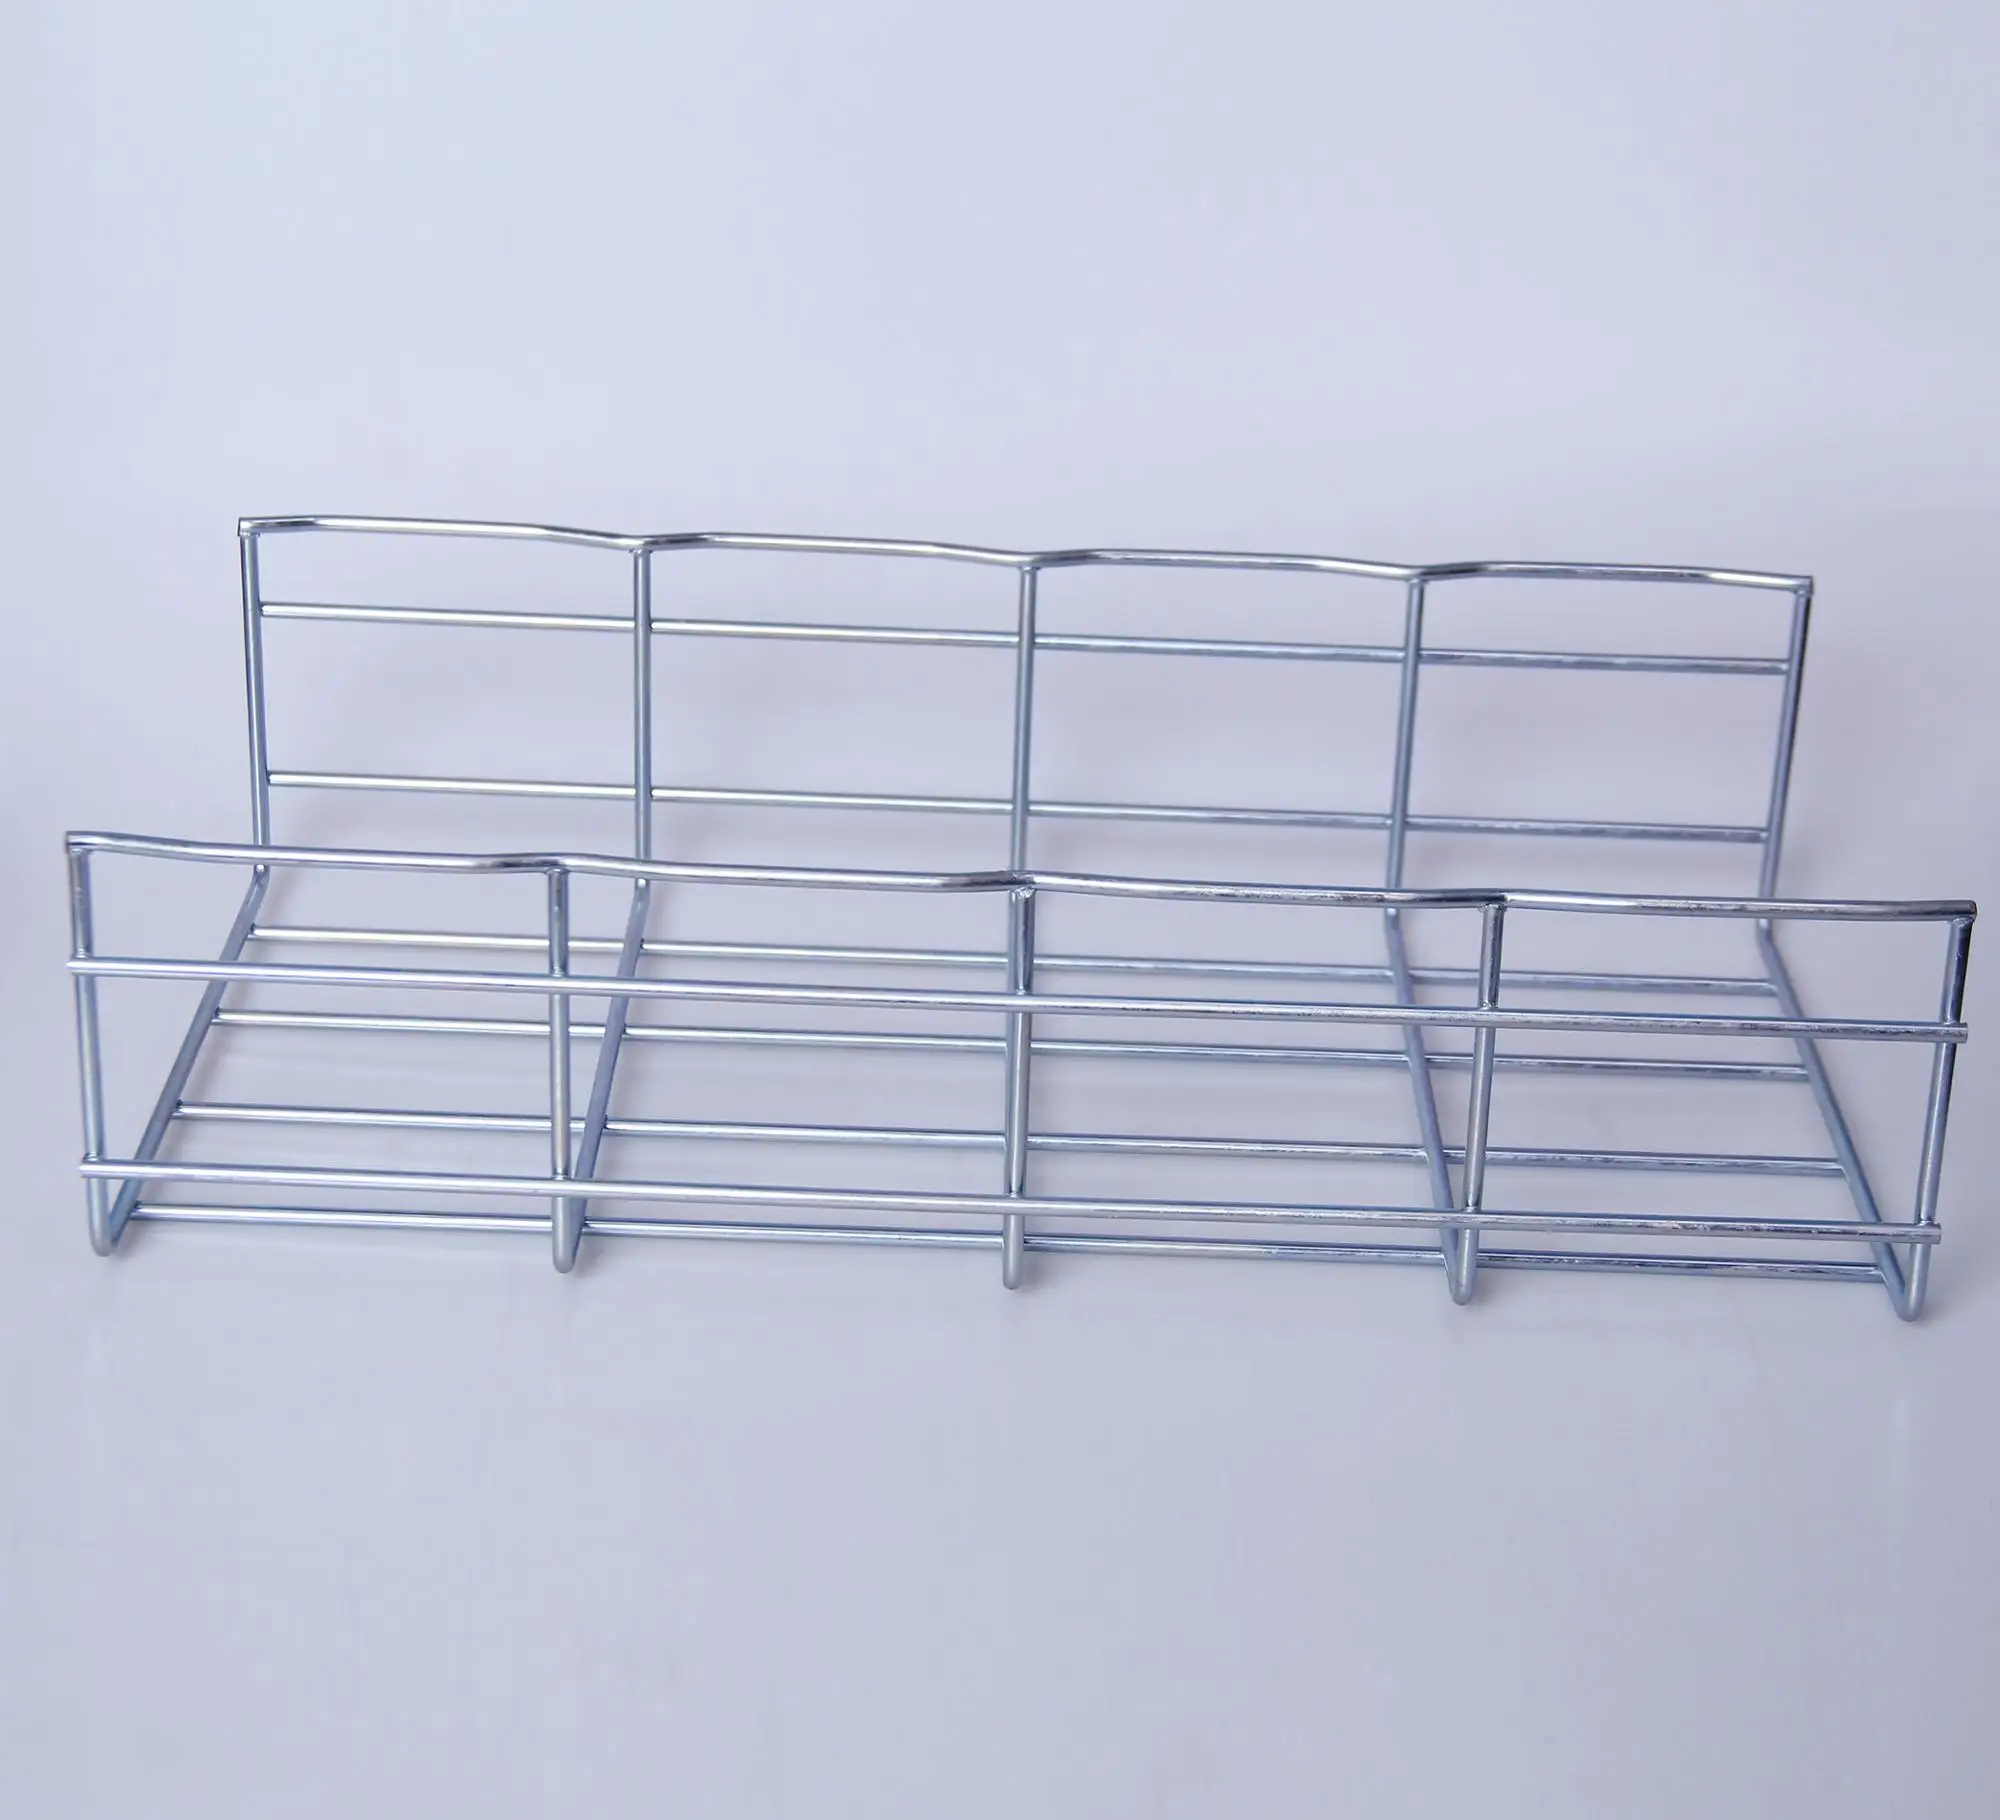 electric basket cable tray Stainless steel wire mesh cable tray for cable mangement